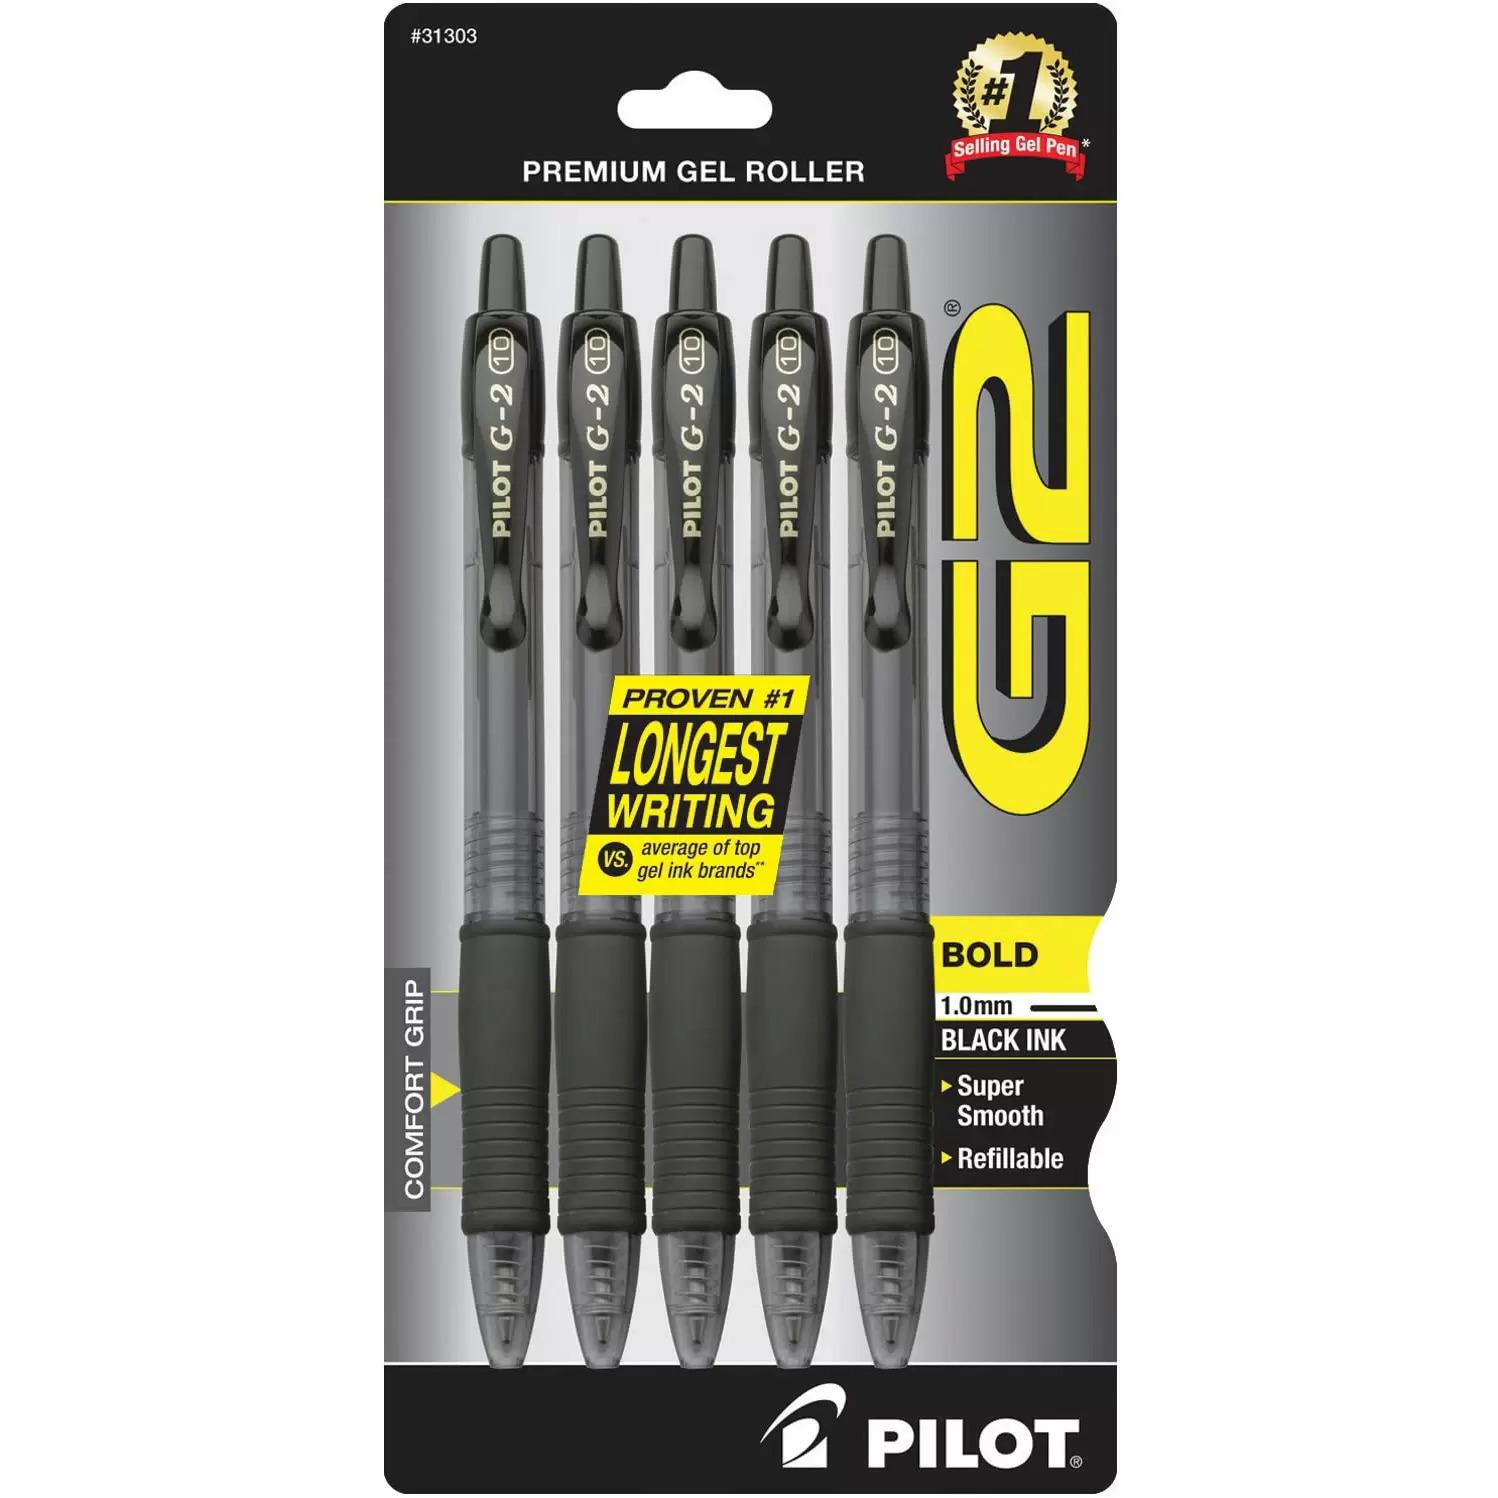 5 PILOT G2 Refillable and Retractable Ball Gel Pens for $4.22